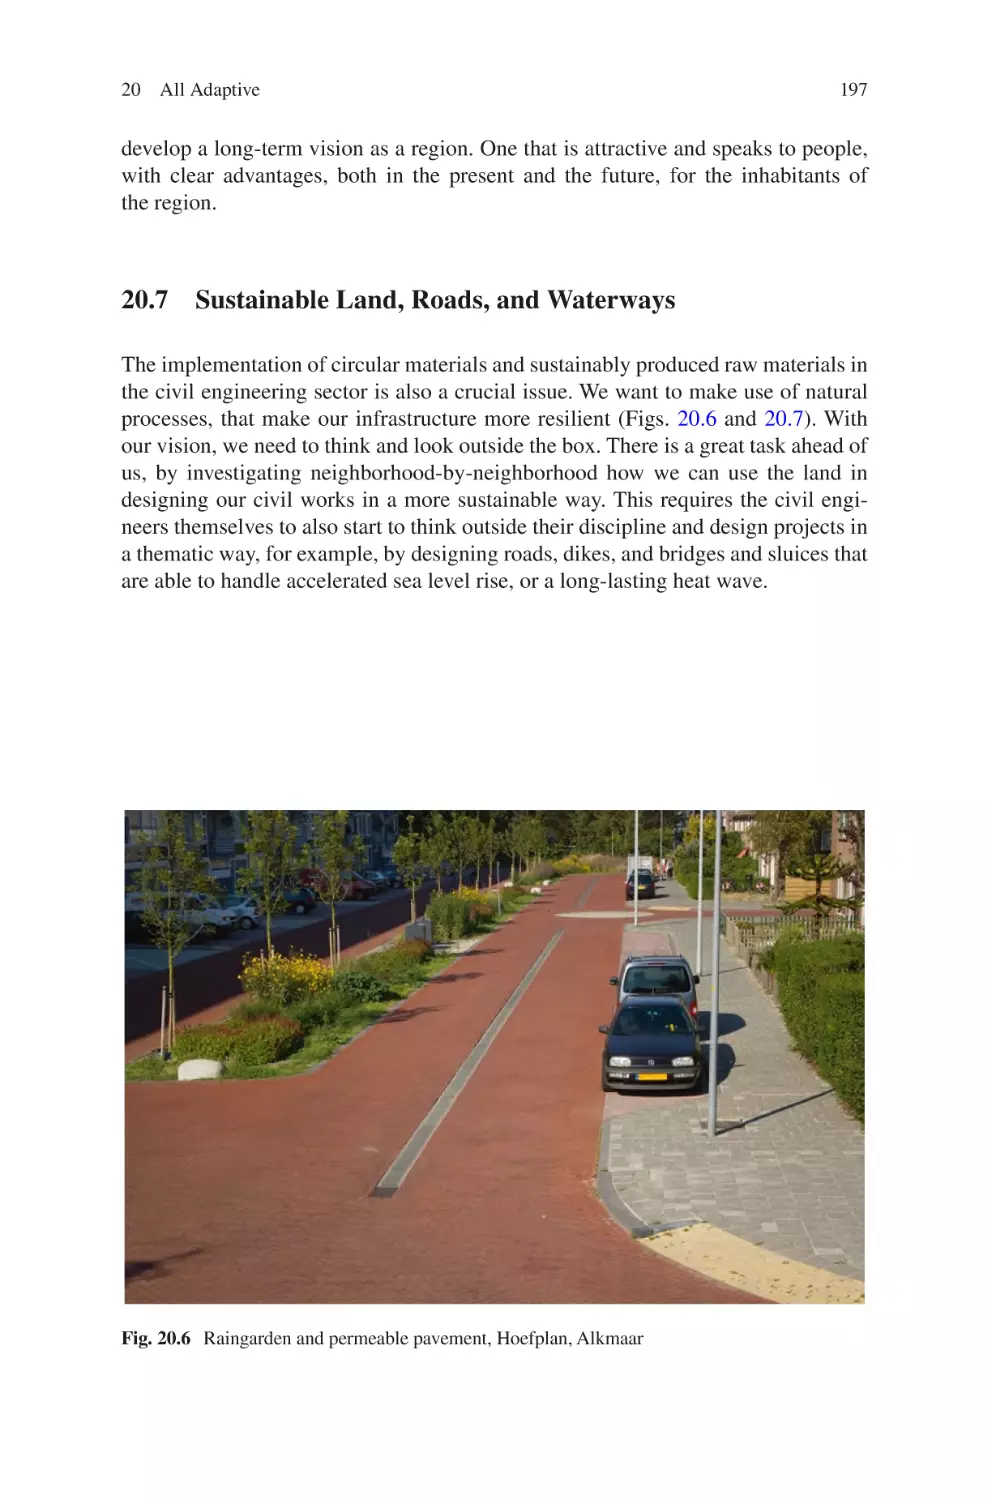 20.7 Sustainable Land, Roads, and Waterways